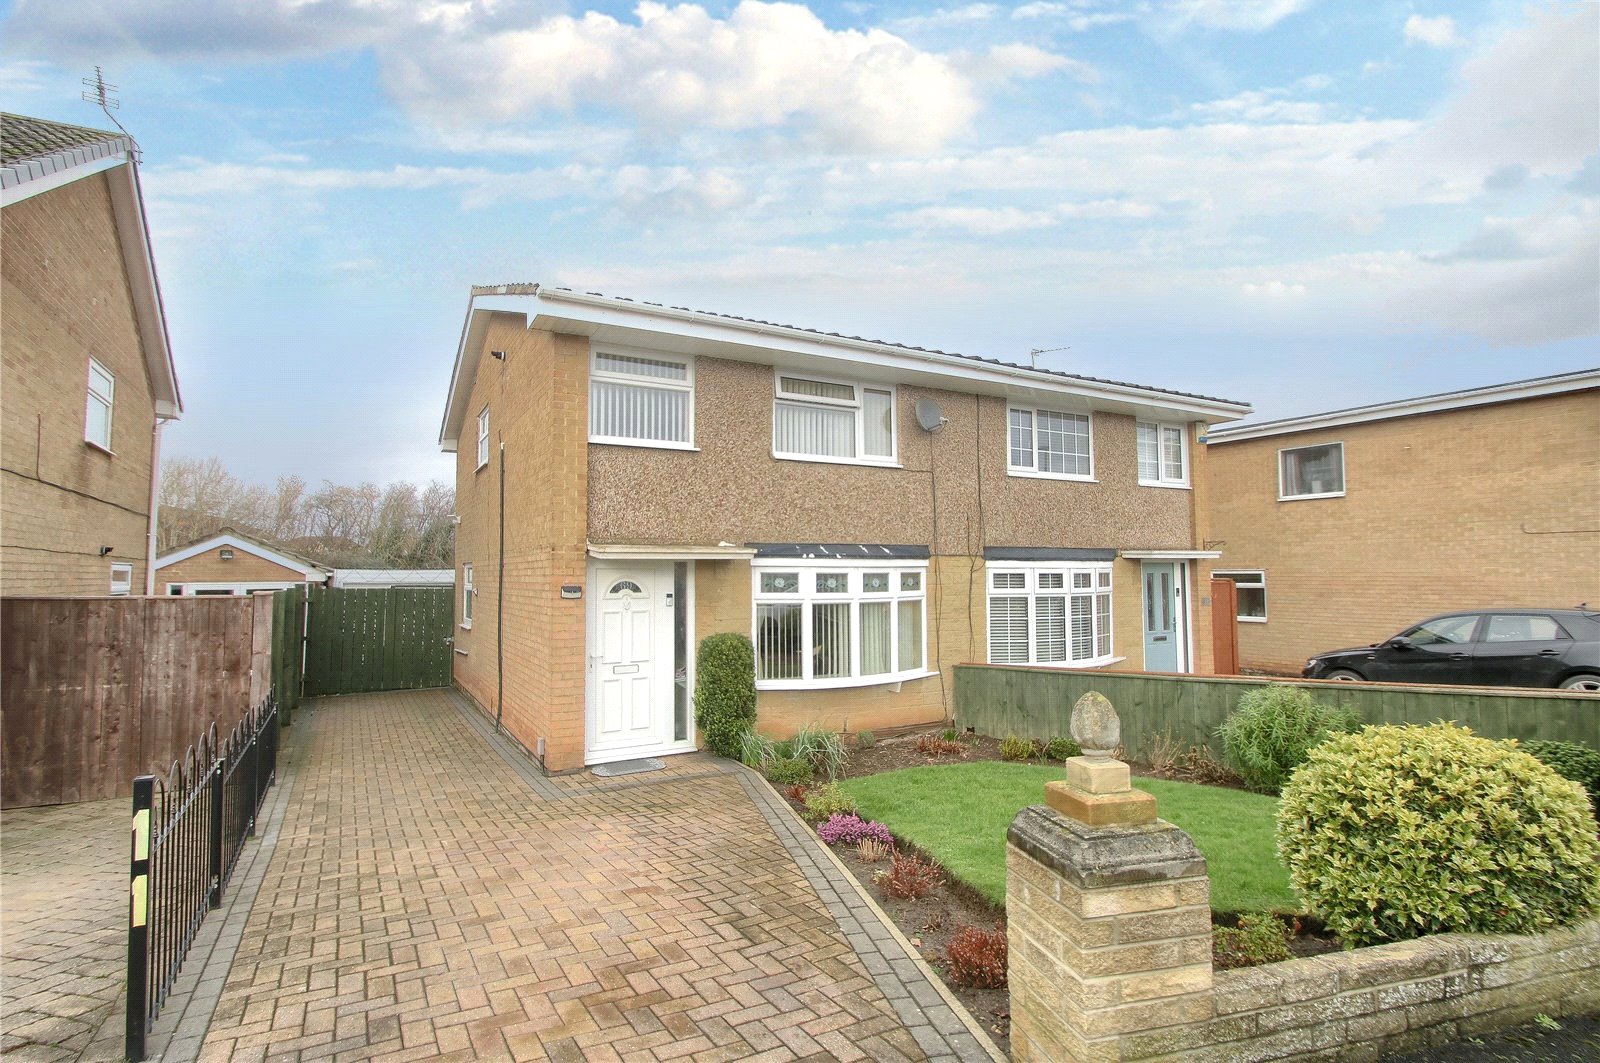 3 bed house for sale in Burnmoor Drive, Eaglescliffe - Property Image 1